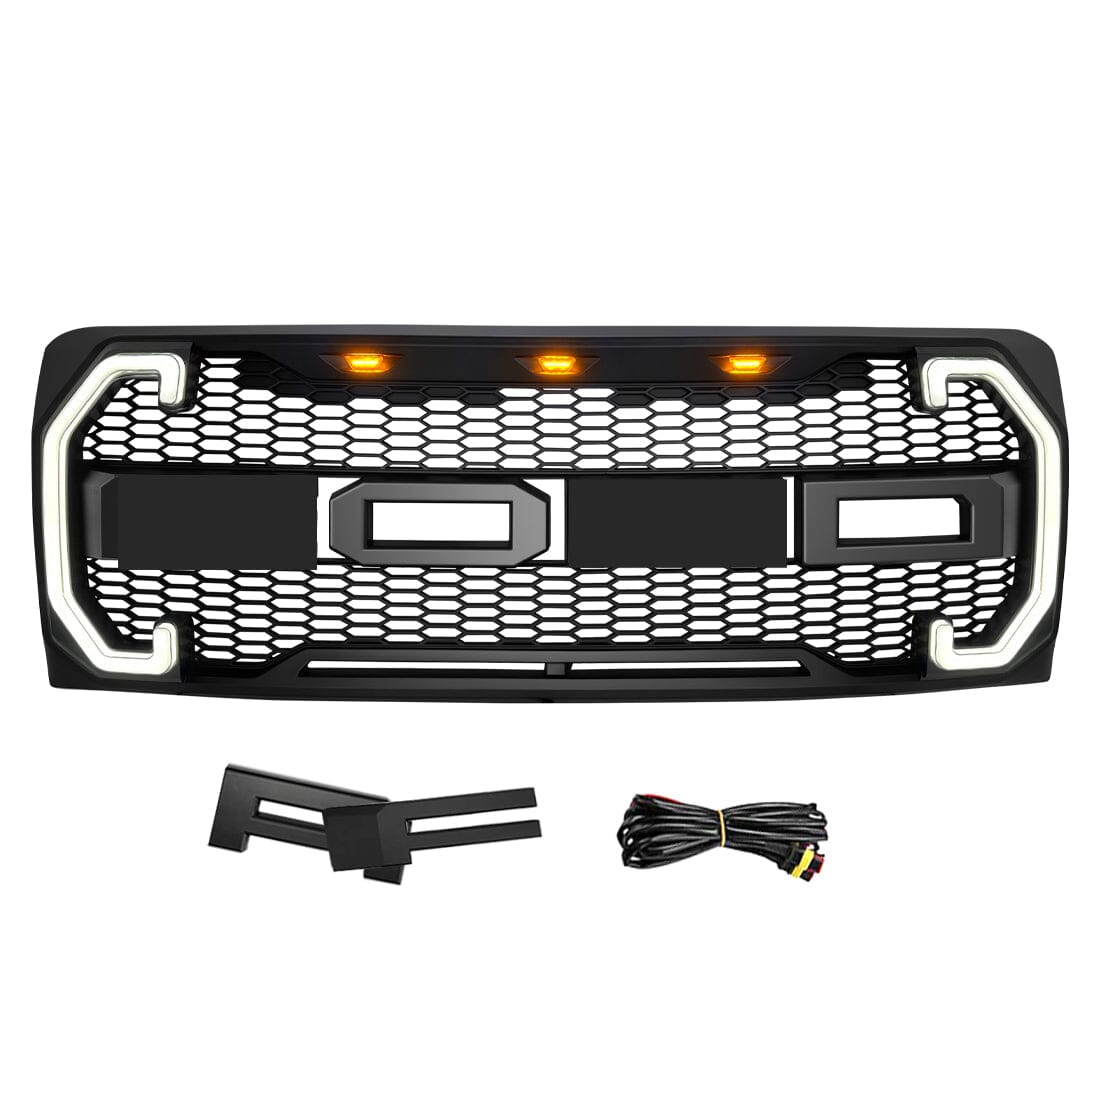 Raptor Style Mesh Grille W/DRL FR & Turn Signal Lights For 2009-2014 Ford F150 | Amoffroad